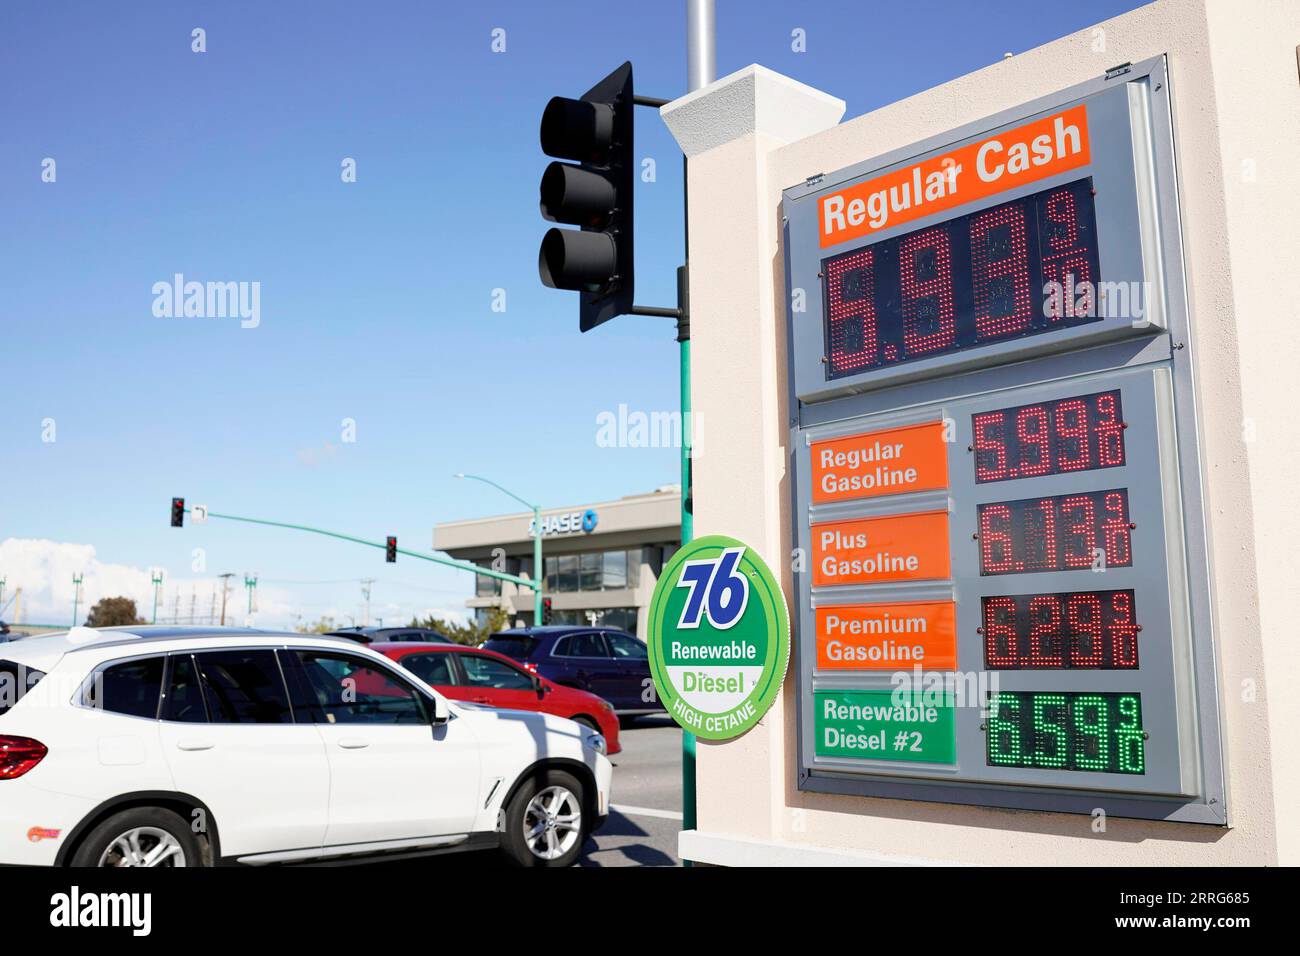 220511 -- MILLBRAE, May 11, 2022 -- Gasoline and diesel prices are displayed at a gas station in Millbrae, California, the United States, May 10, 2022. The national average prices for regular gasoline and diesel in the United States both climbed to fresh record highs Tuesday. According to the American Automobile Association AAA, which provides the latest gas price analysis based on data from 130,000 gas stations nationwide, the regular gas price rose four cents on Tuesday to 4.37 U.S. dollars a gallon, overtaking the prior record of 4.33 dollars on March 11. Photo by /Xinhua U.S.-CALIFORNIA-MI Stock Photo